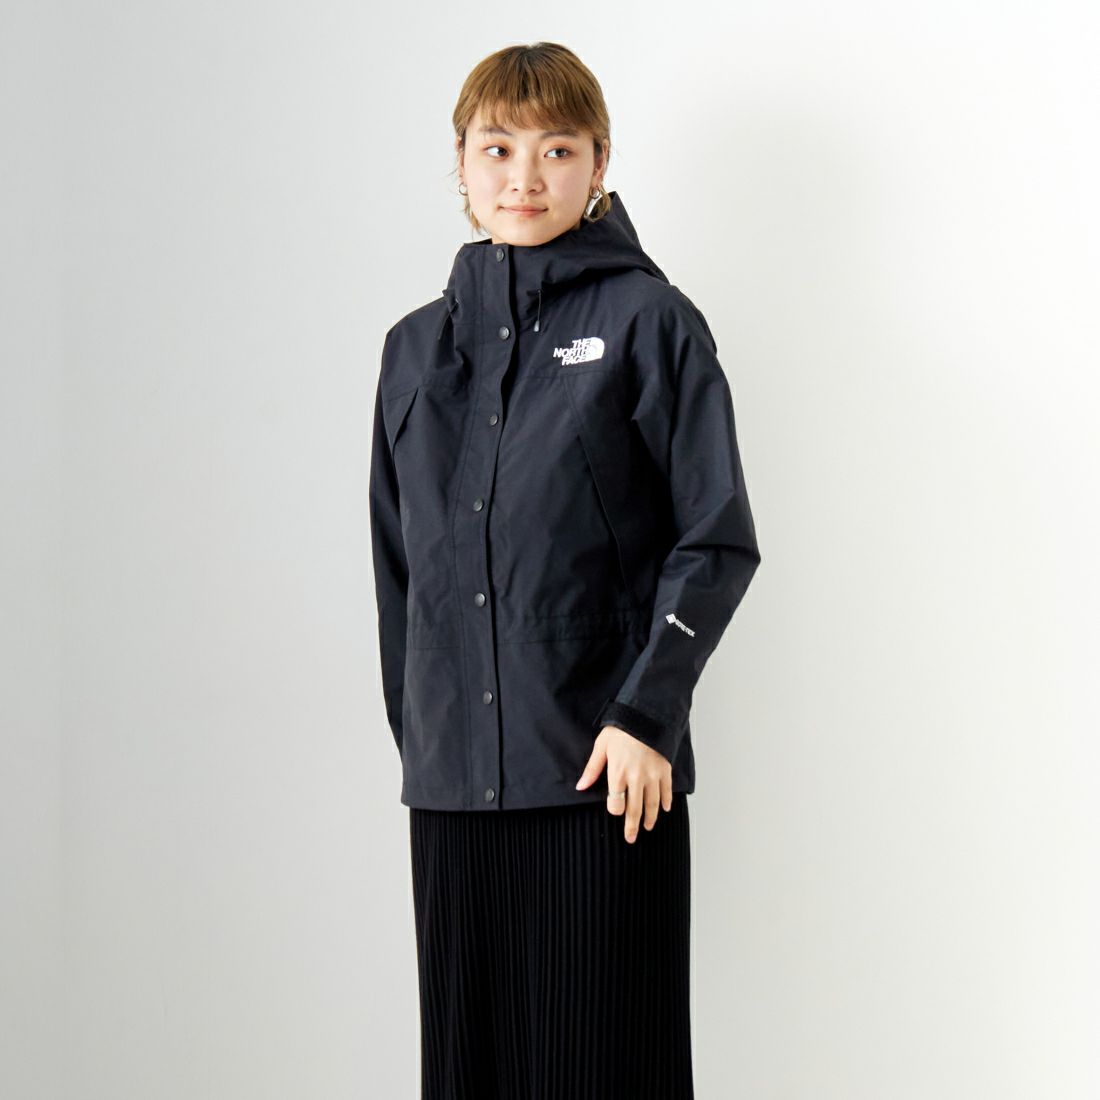 THE NORTH FACE [ザ ノースフェイス] マウンテンライトジャケット [NPW62236]｜ジーンズファクトリー公式通販サイト -  JEANS FACTORY Online Shop